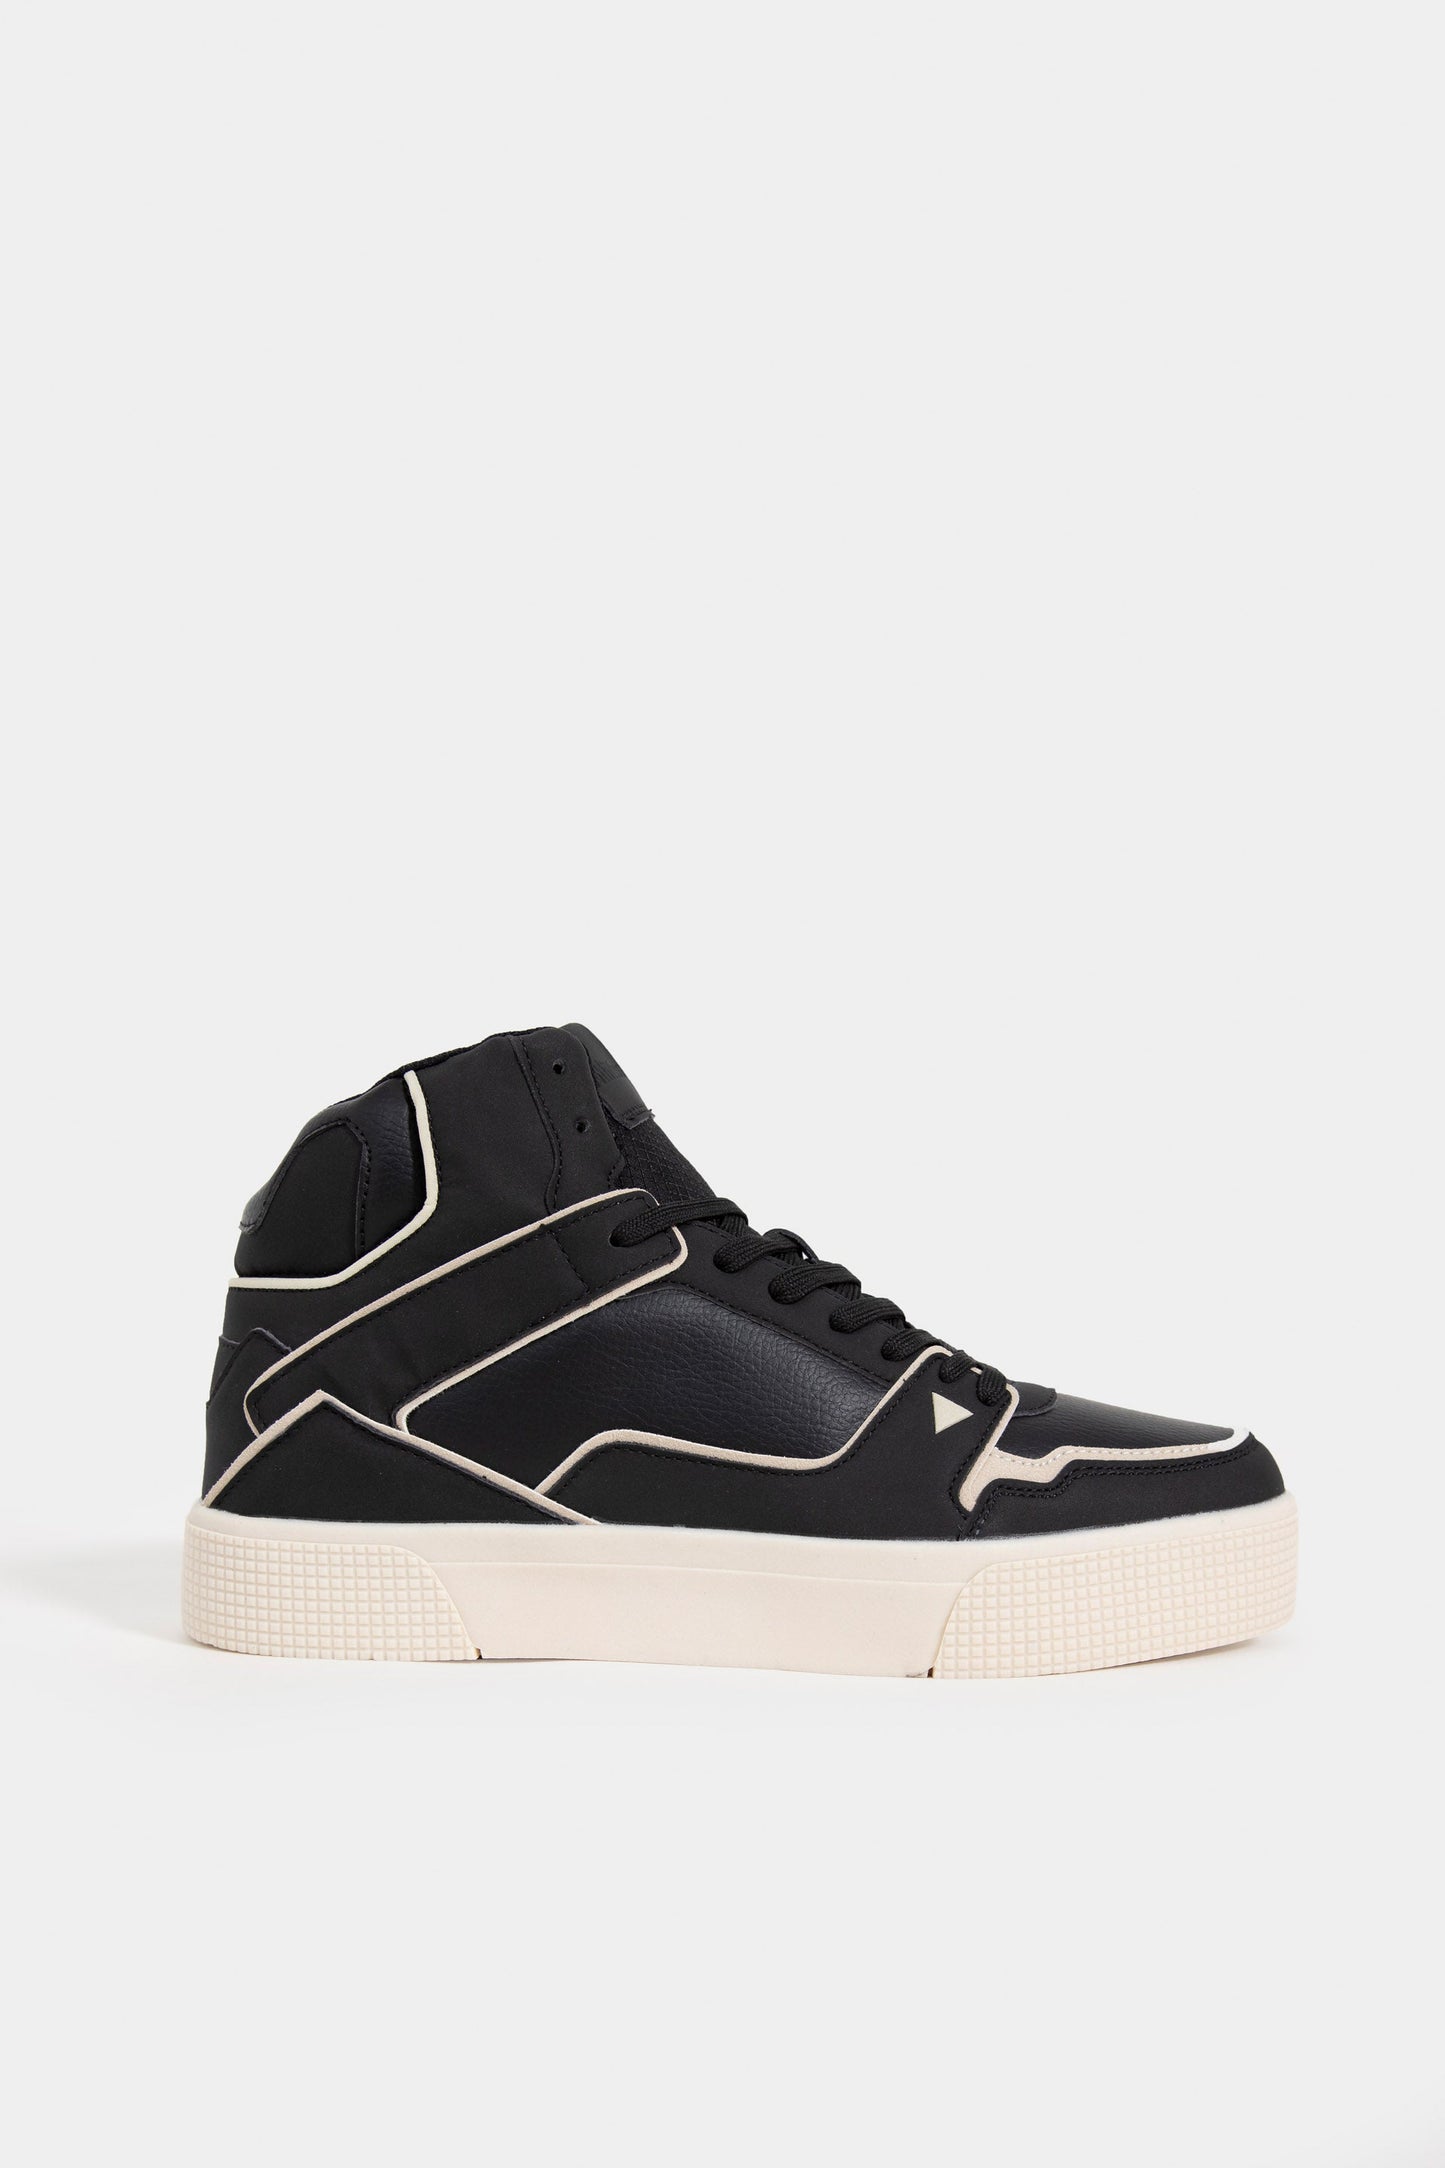 High-top Sneakers With Contrast Piping